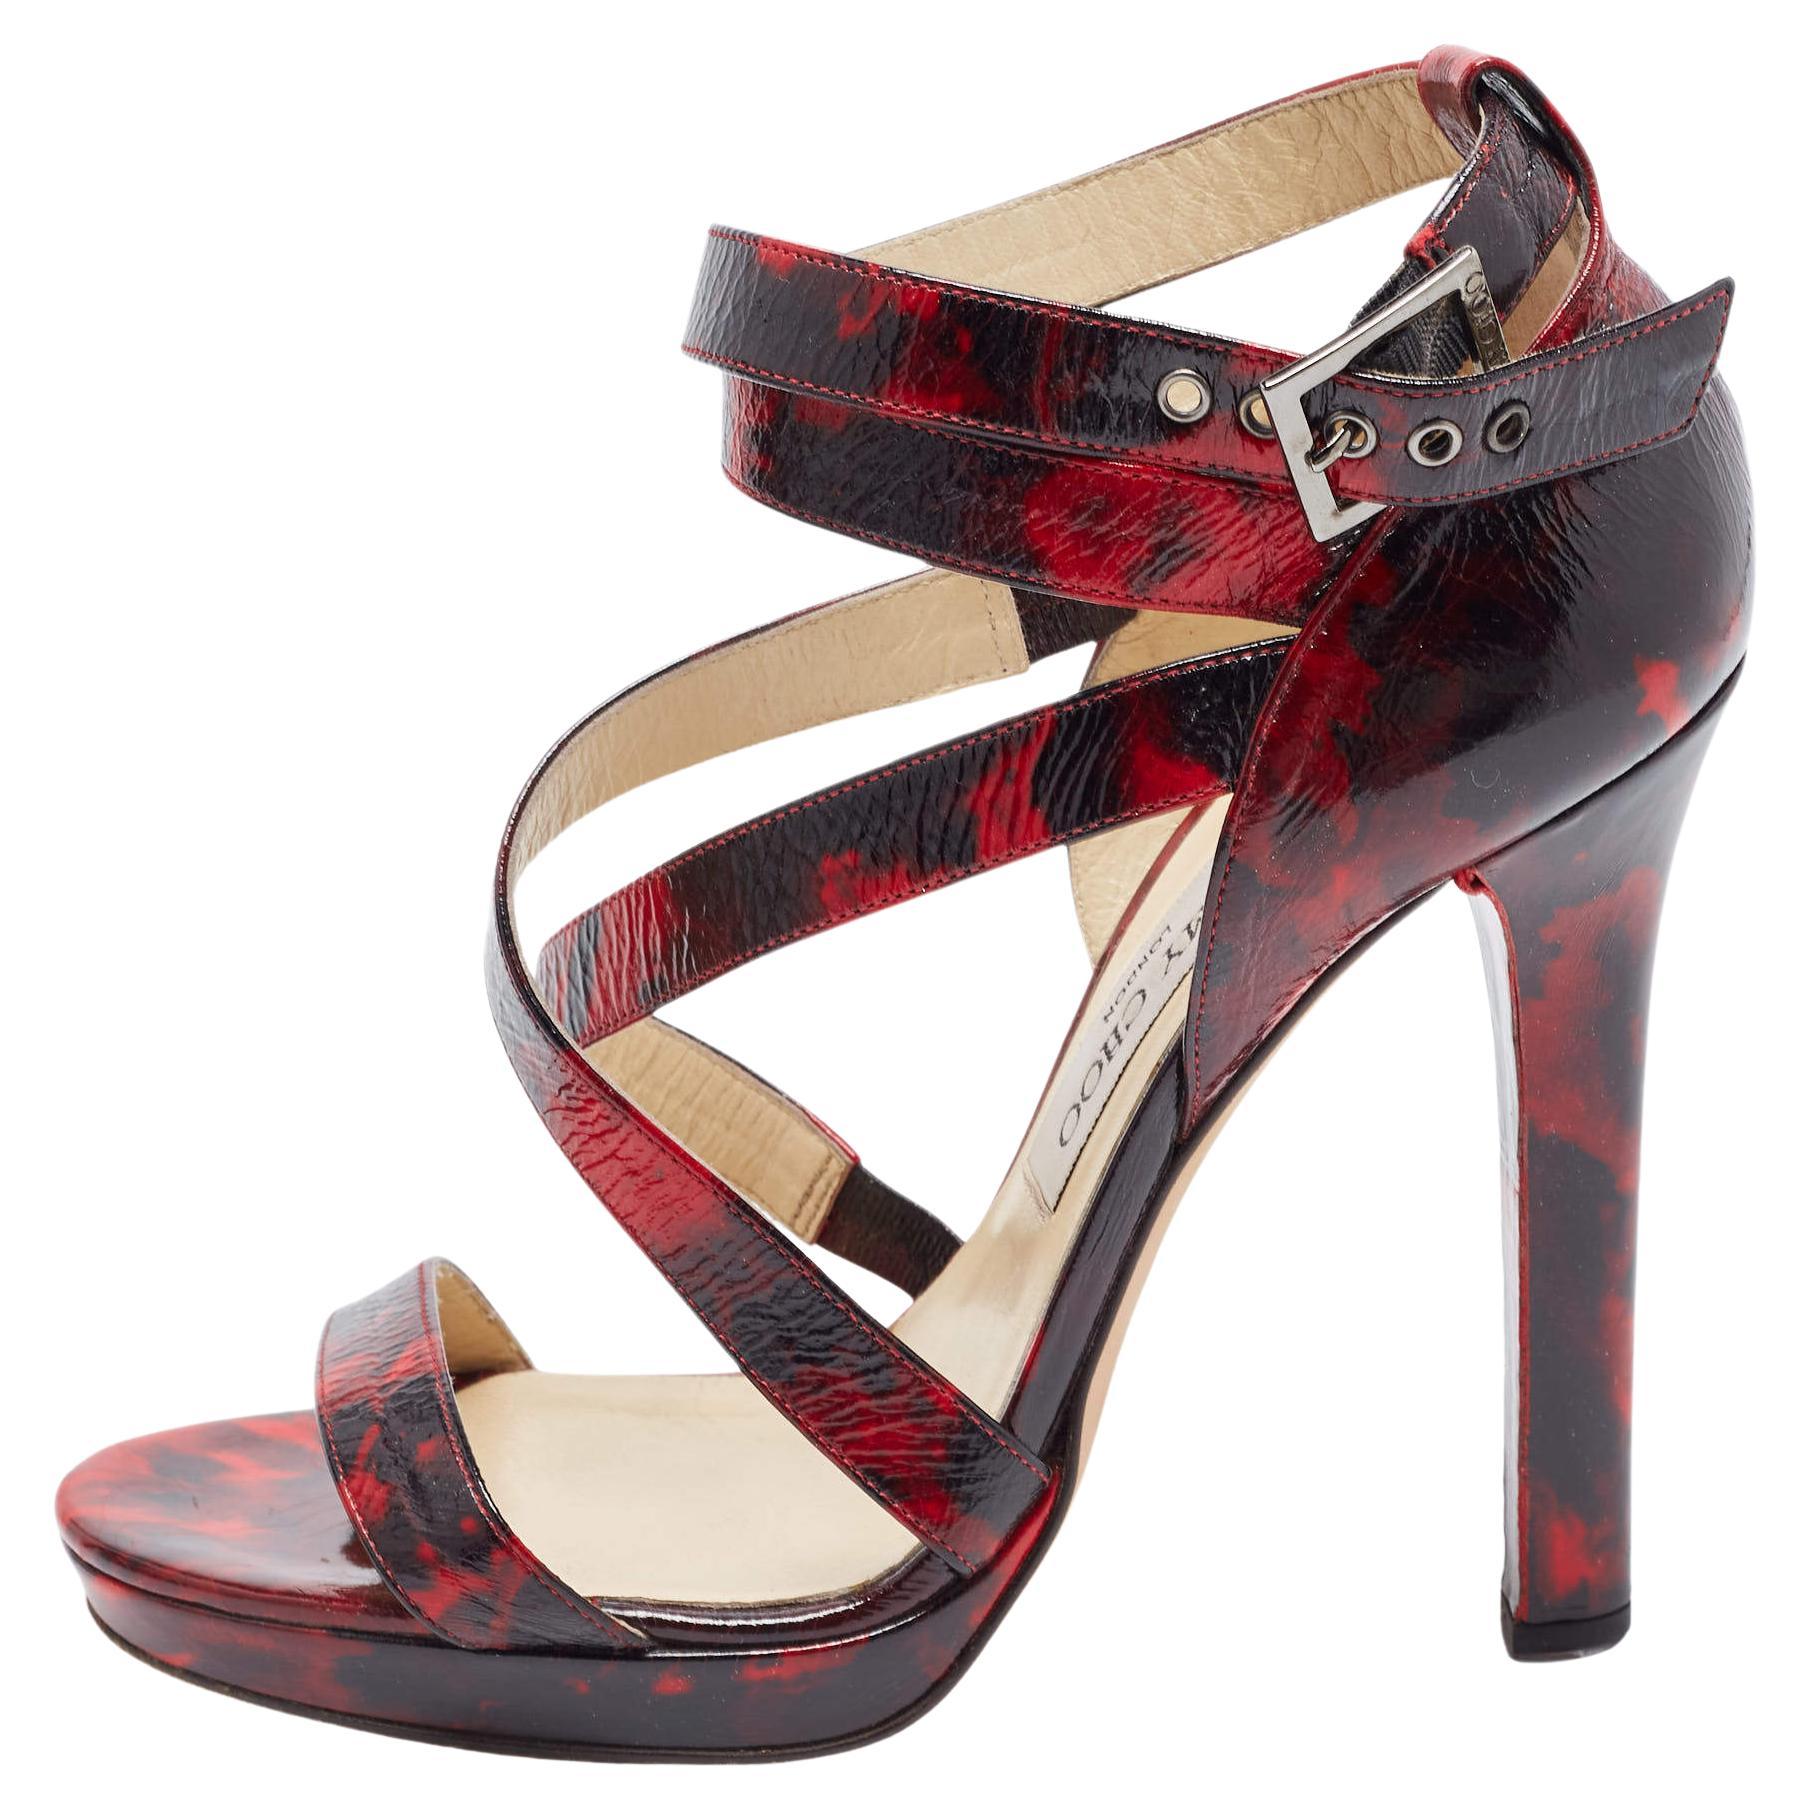 Jimmy Choo Red/Black Leather Criss Cross Ankle Strap Sandals Size 37.5 For Sale